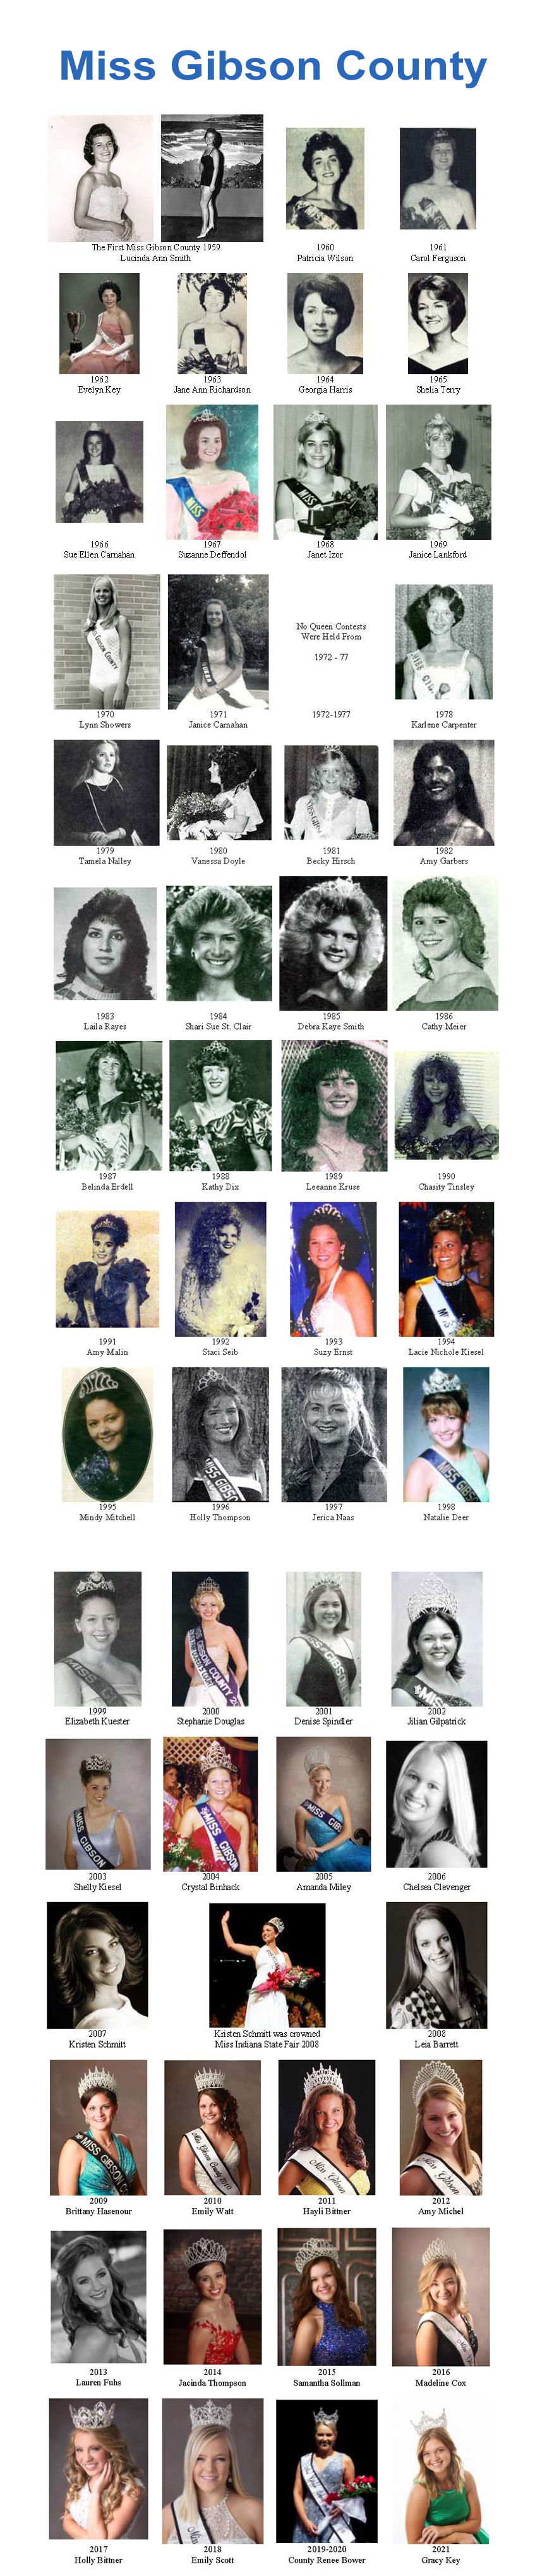 Previous Miss Gibson County Indiana Queens